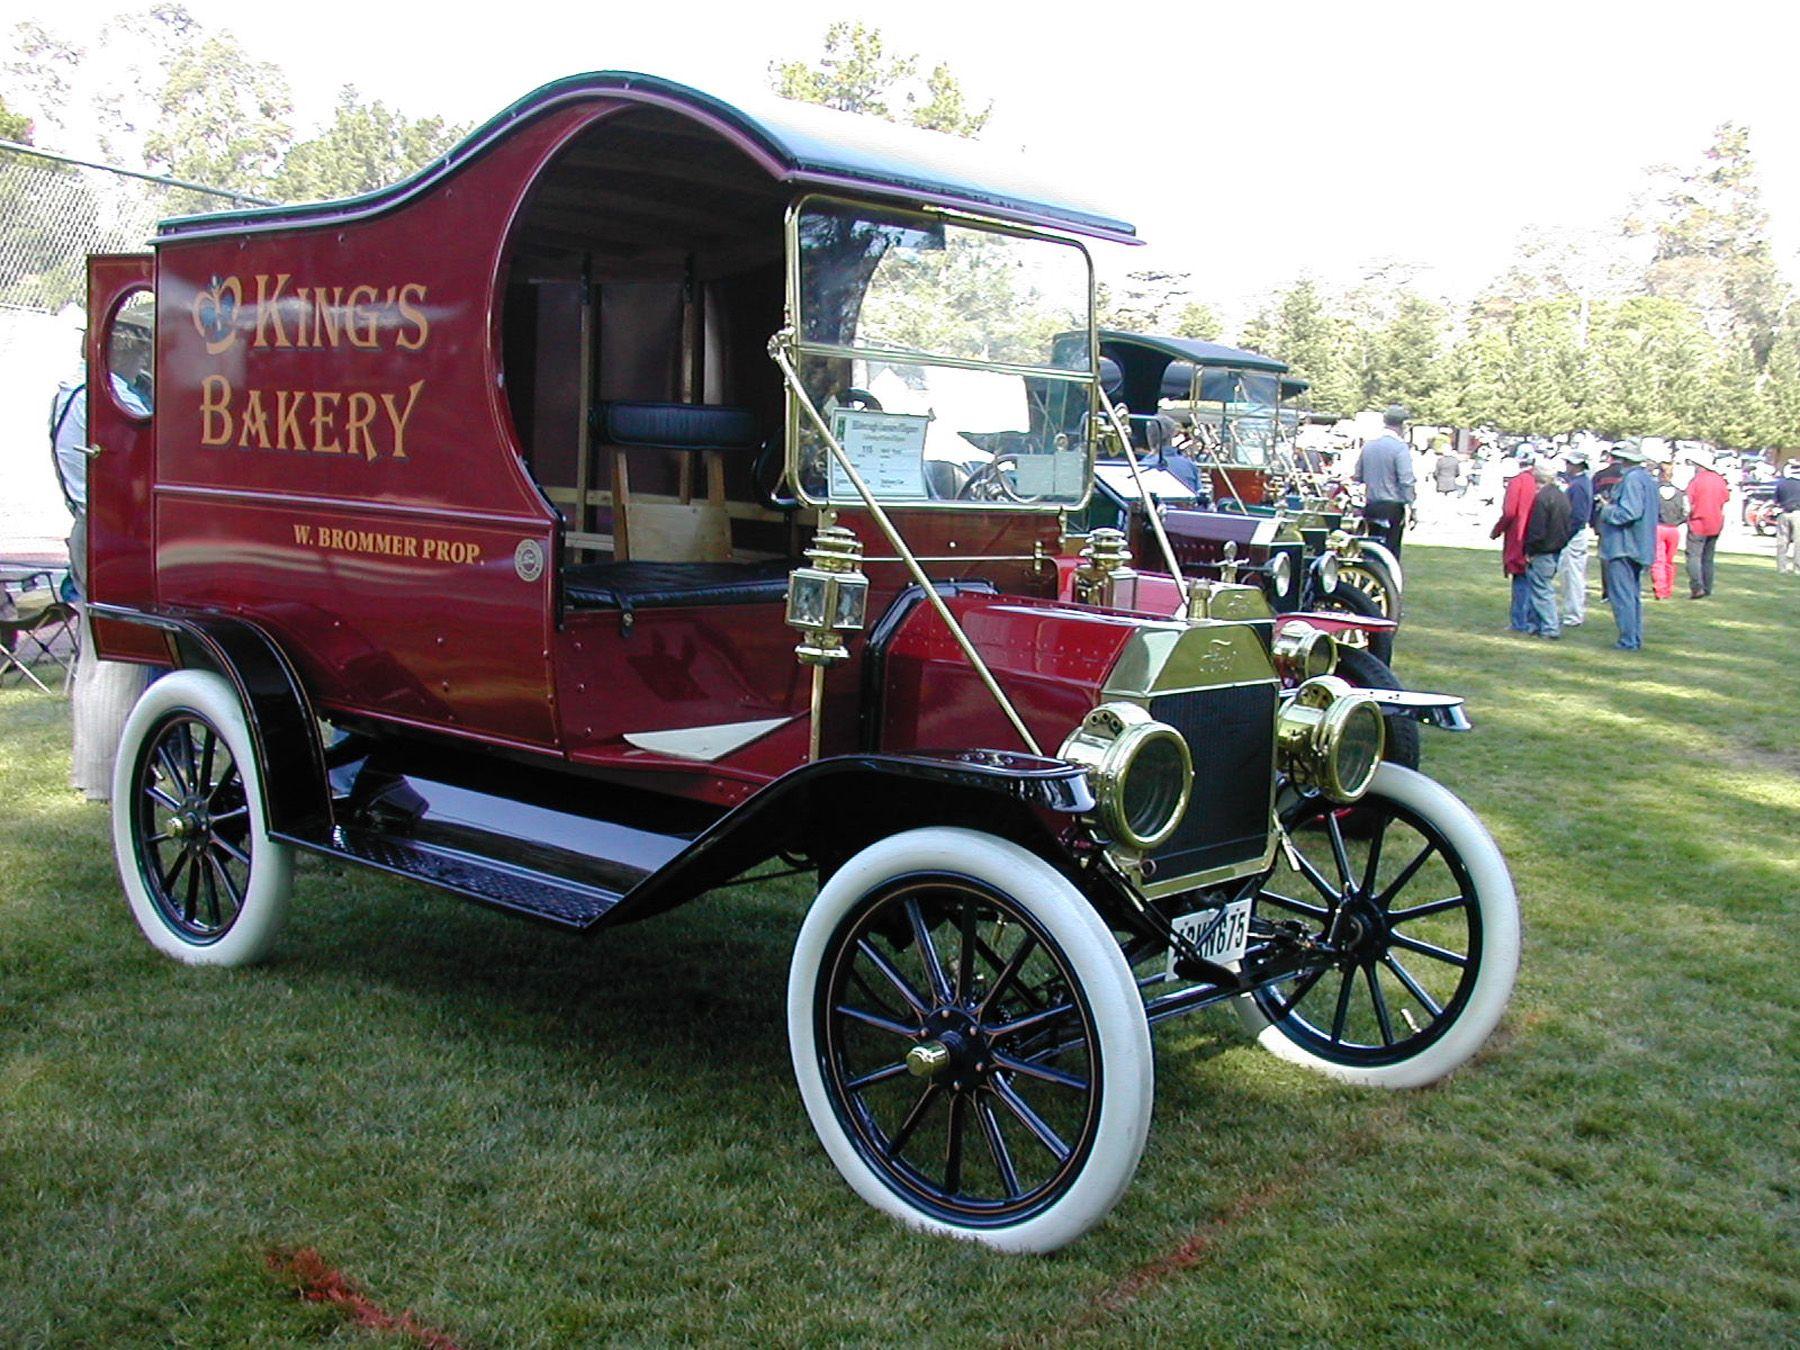 Model T Ford Logo - Grandfather's Bakery Logo on 1912 Model T - Tribute to Memory